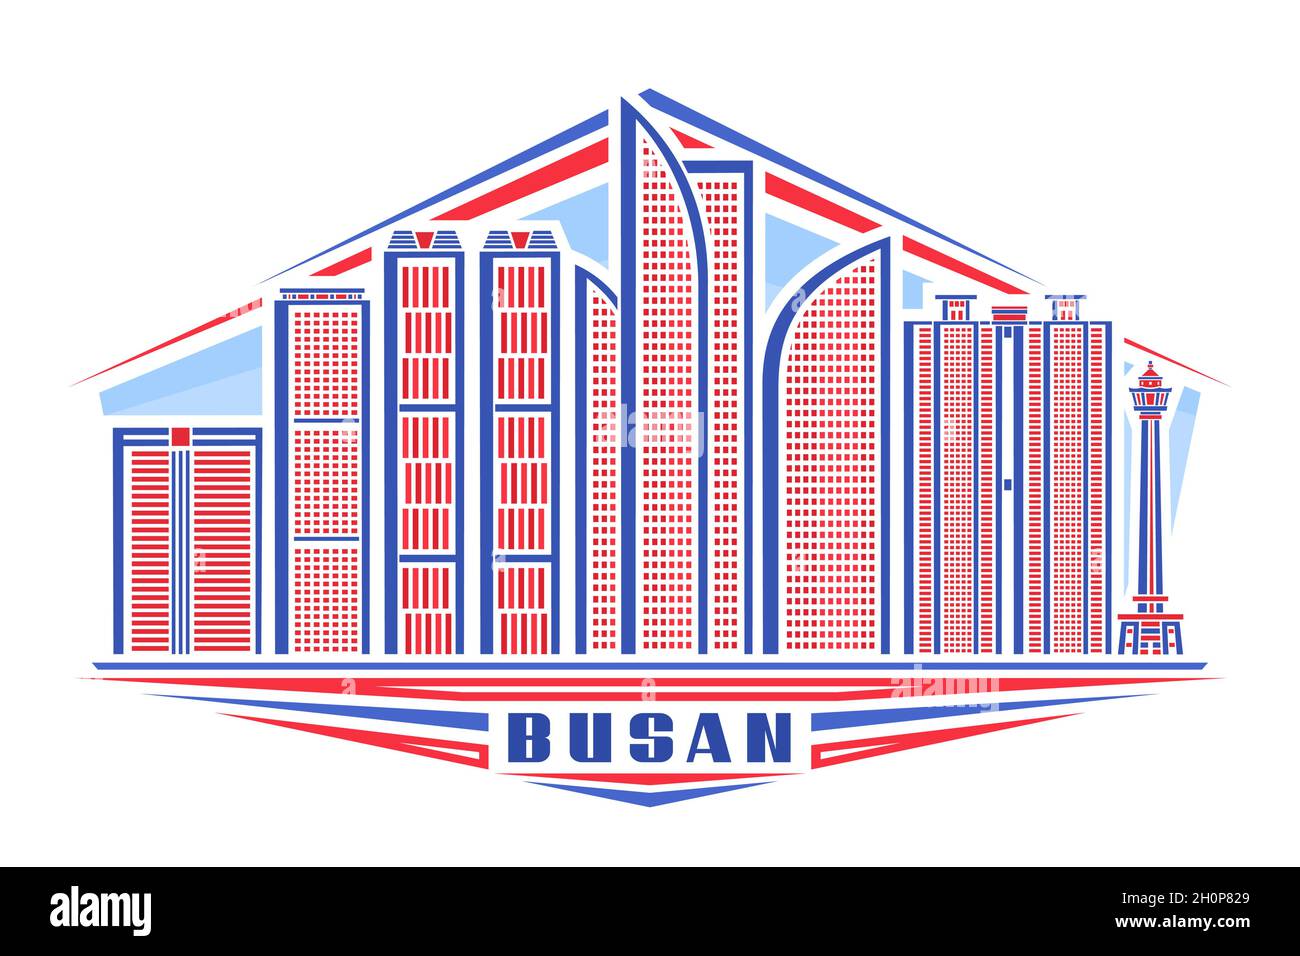 Vector illustration of Busan, horizontal poster with linear design famous busan city scape on day sky background, asian urban line art concept with de Stock Vector